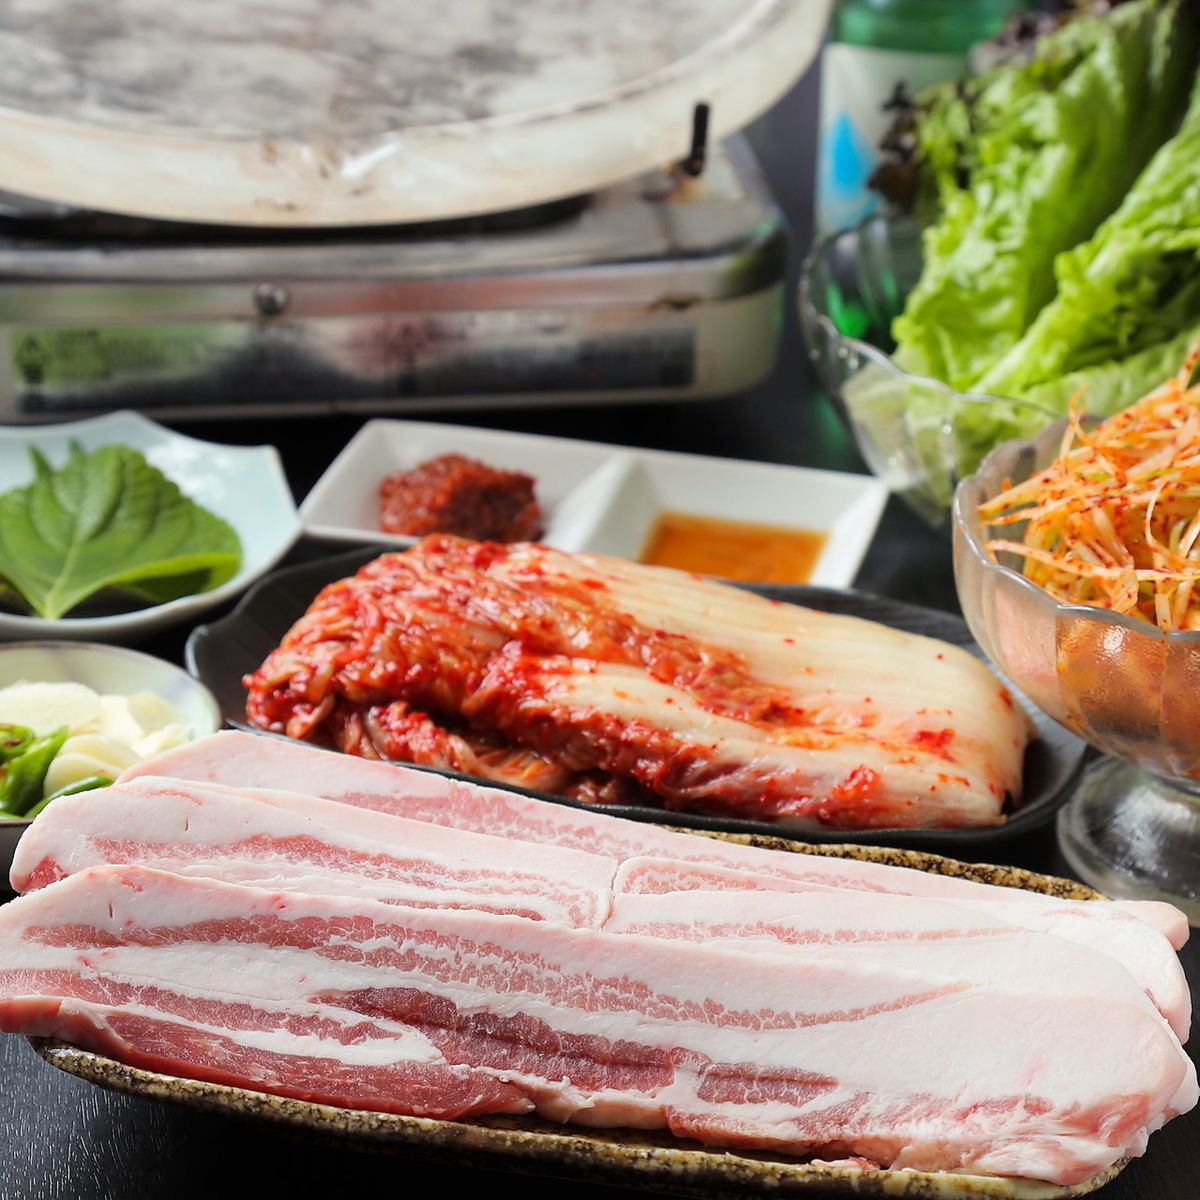 Enjoy the exquisite samgyeopsal marinated in our special sauce!